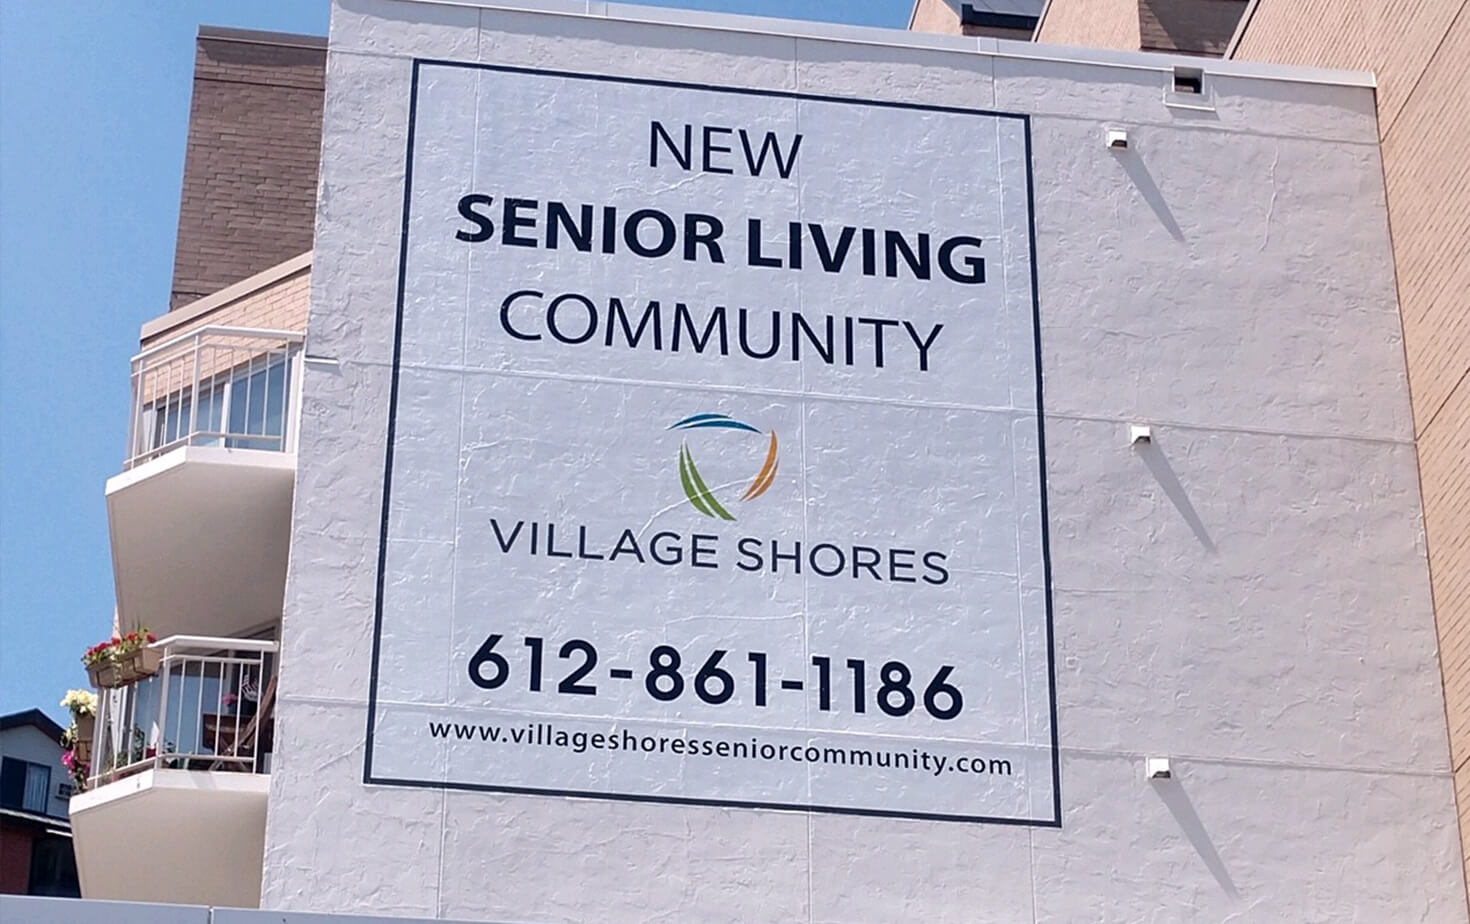 Village Shores Exterior Wall Mural on Side of Building